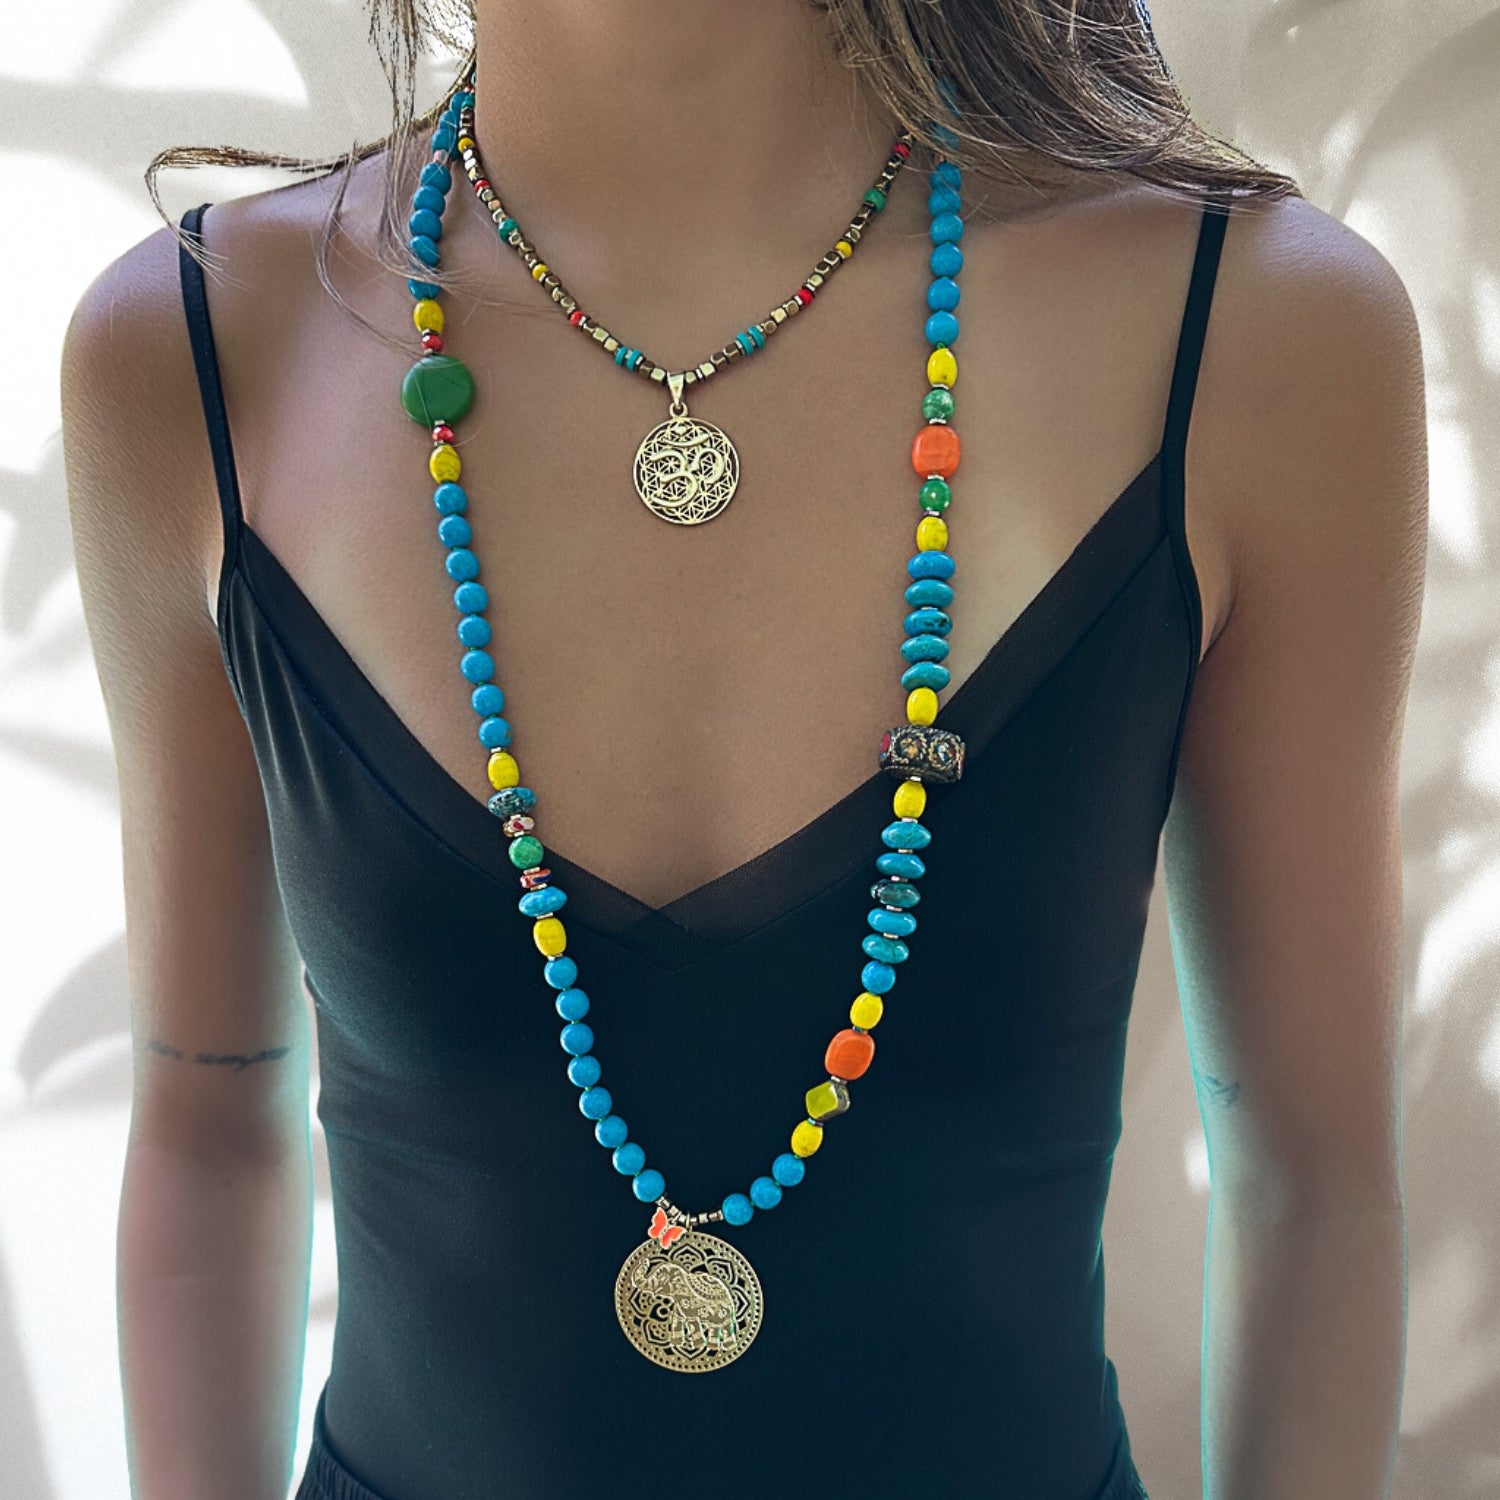 Our model beautifully showcases the Colorful Therapy Elephant Turquoise Necklace, highlighting its captivating turquoise beads, colorful crystals, and intricate elephant pendant.